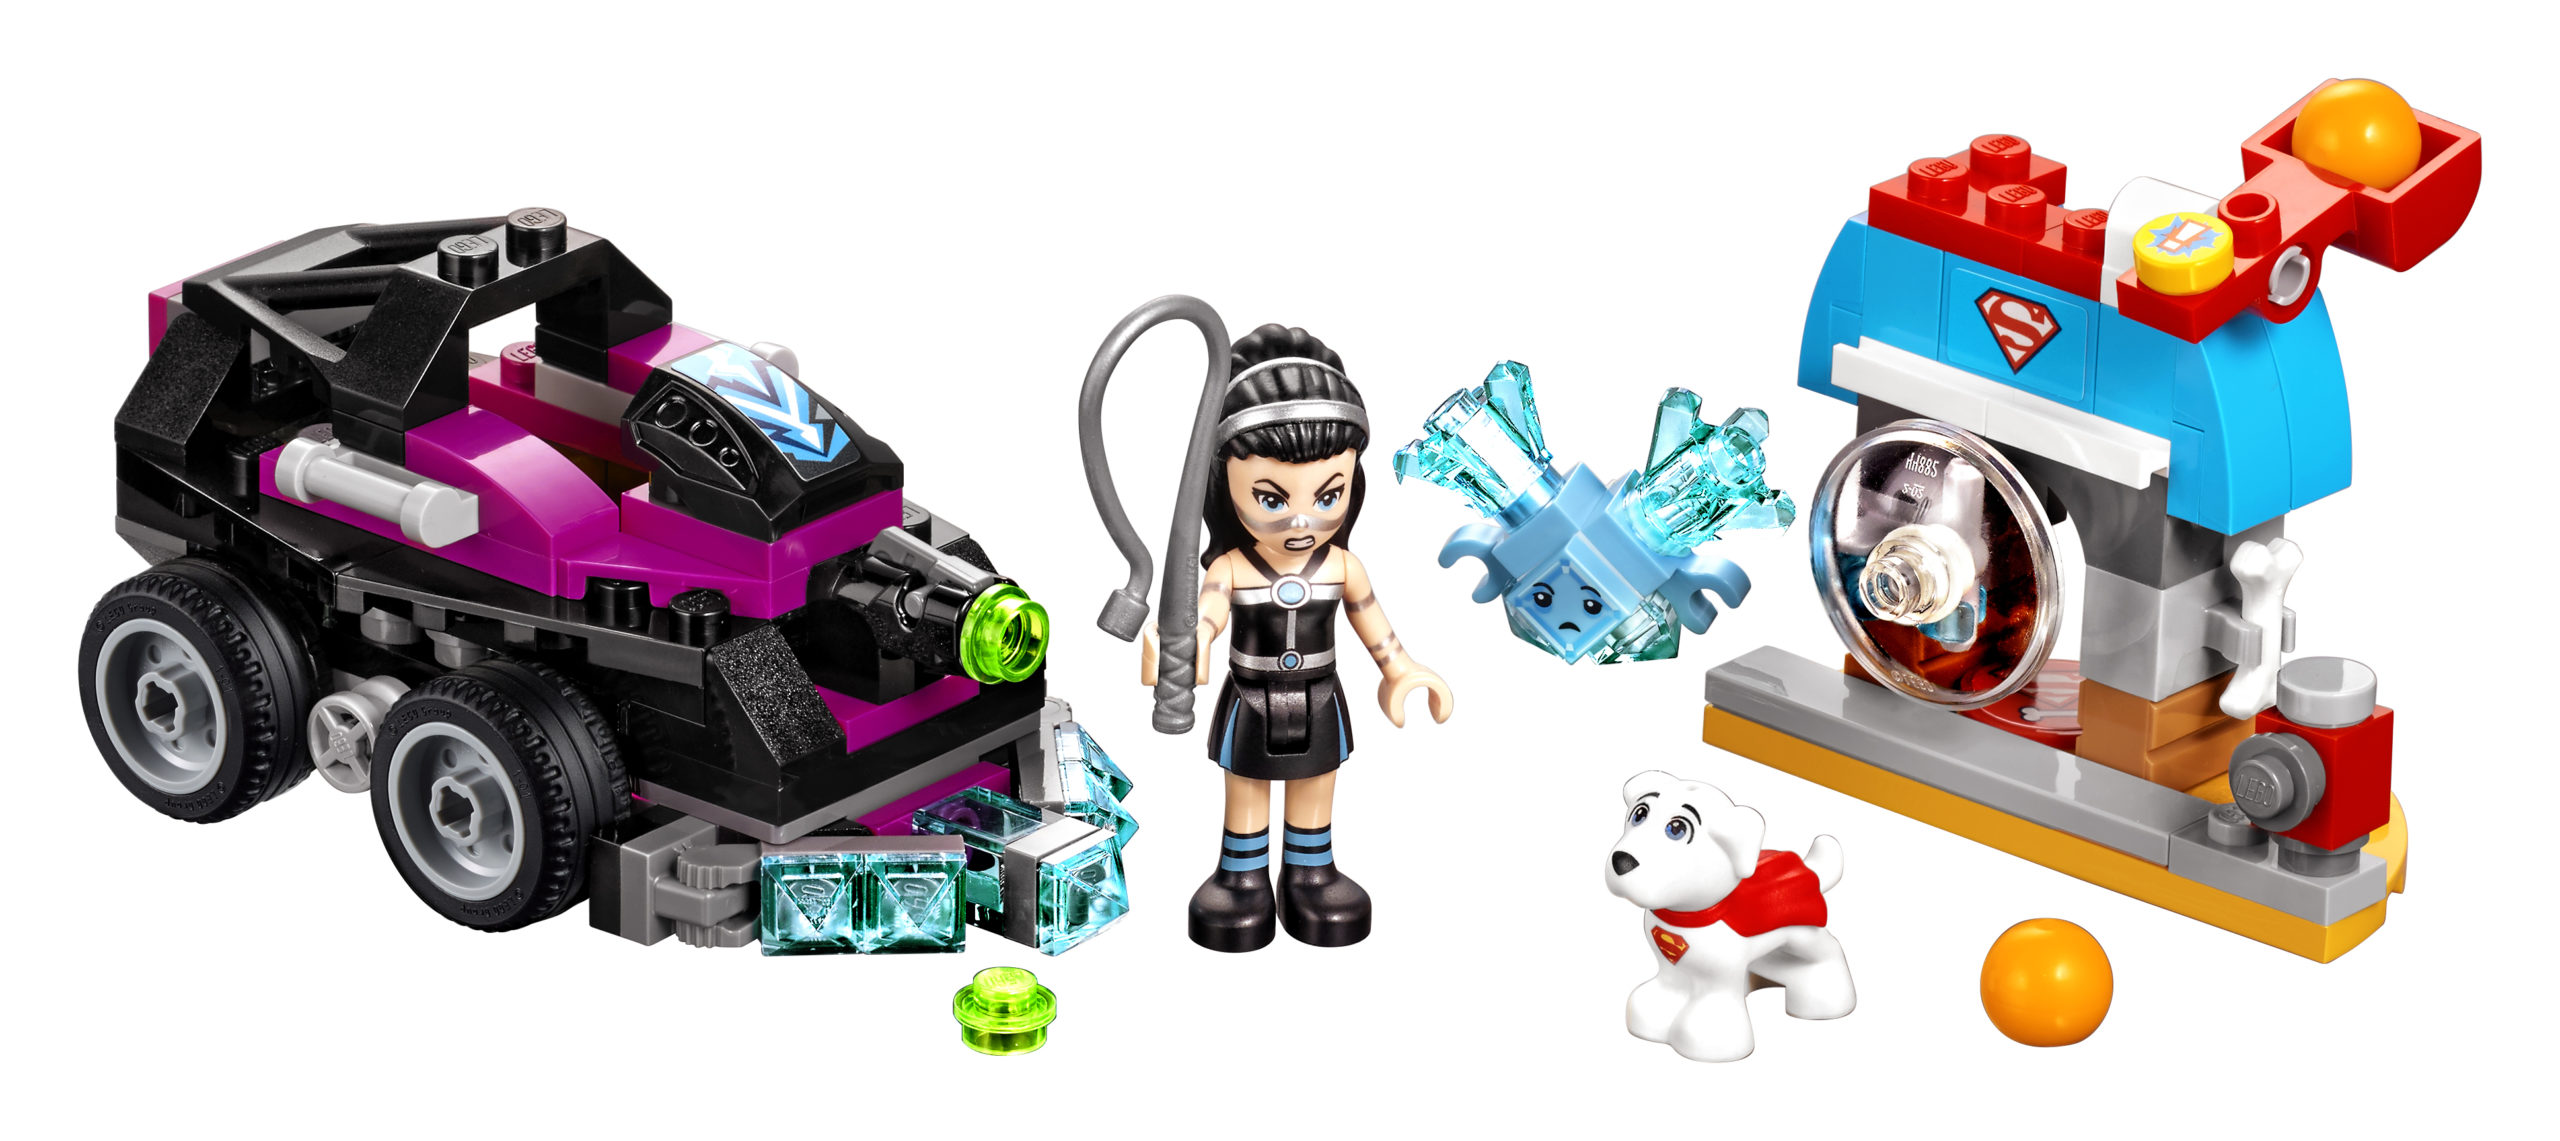 DC Super Hero Girls Sets Make The Most Of LEGO’s Friends Line